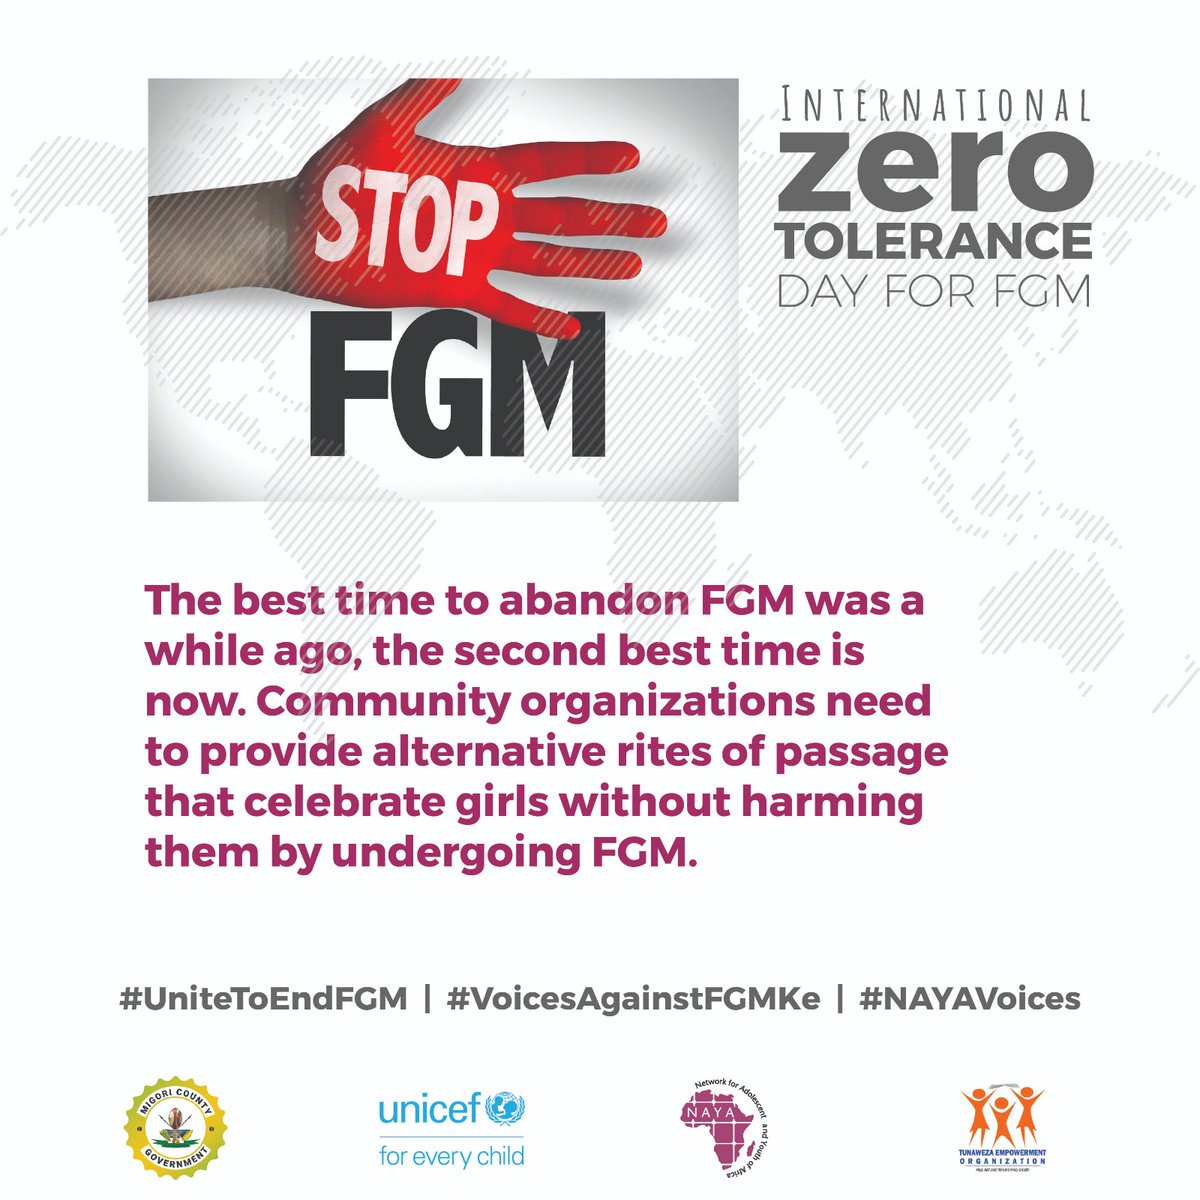 Offering alternative rites of passage ceremonies that celebrate womanhood without FGM can help communities preserve cultural traditions while eliminating harmful practices.
#UnitedToEndFGM
#VoicesAgainstFGMKe
#NAYAVoices
@Unicefprotects @UNICEFKenya